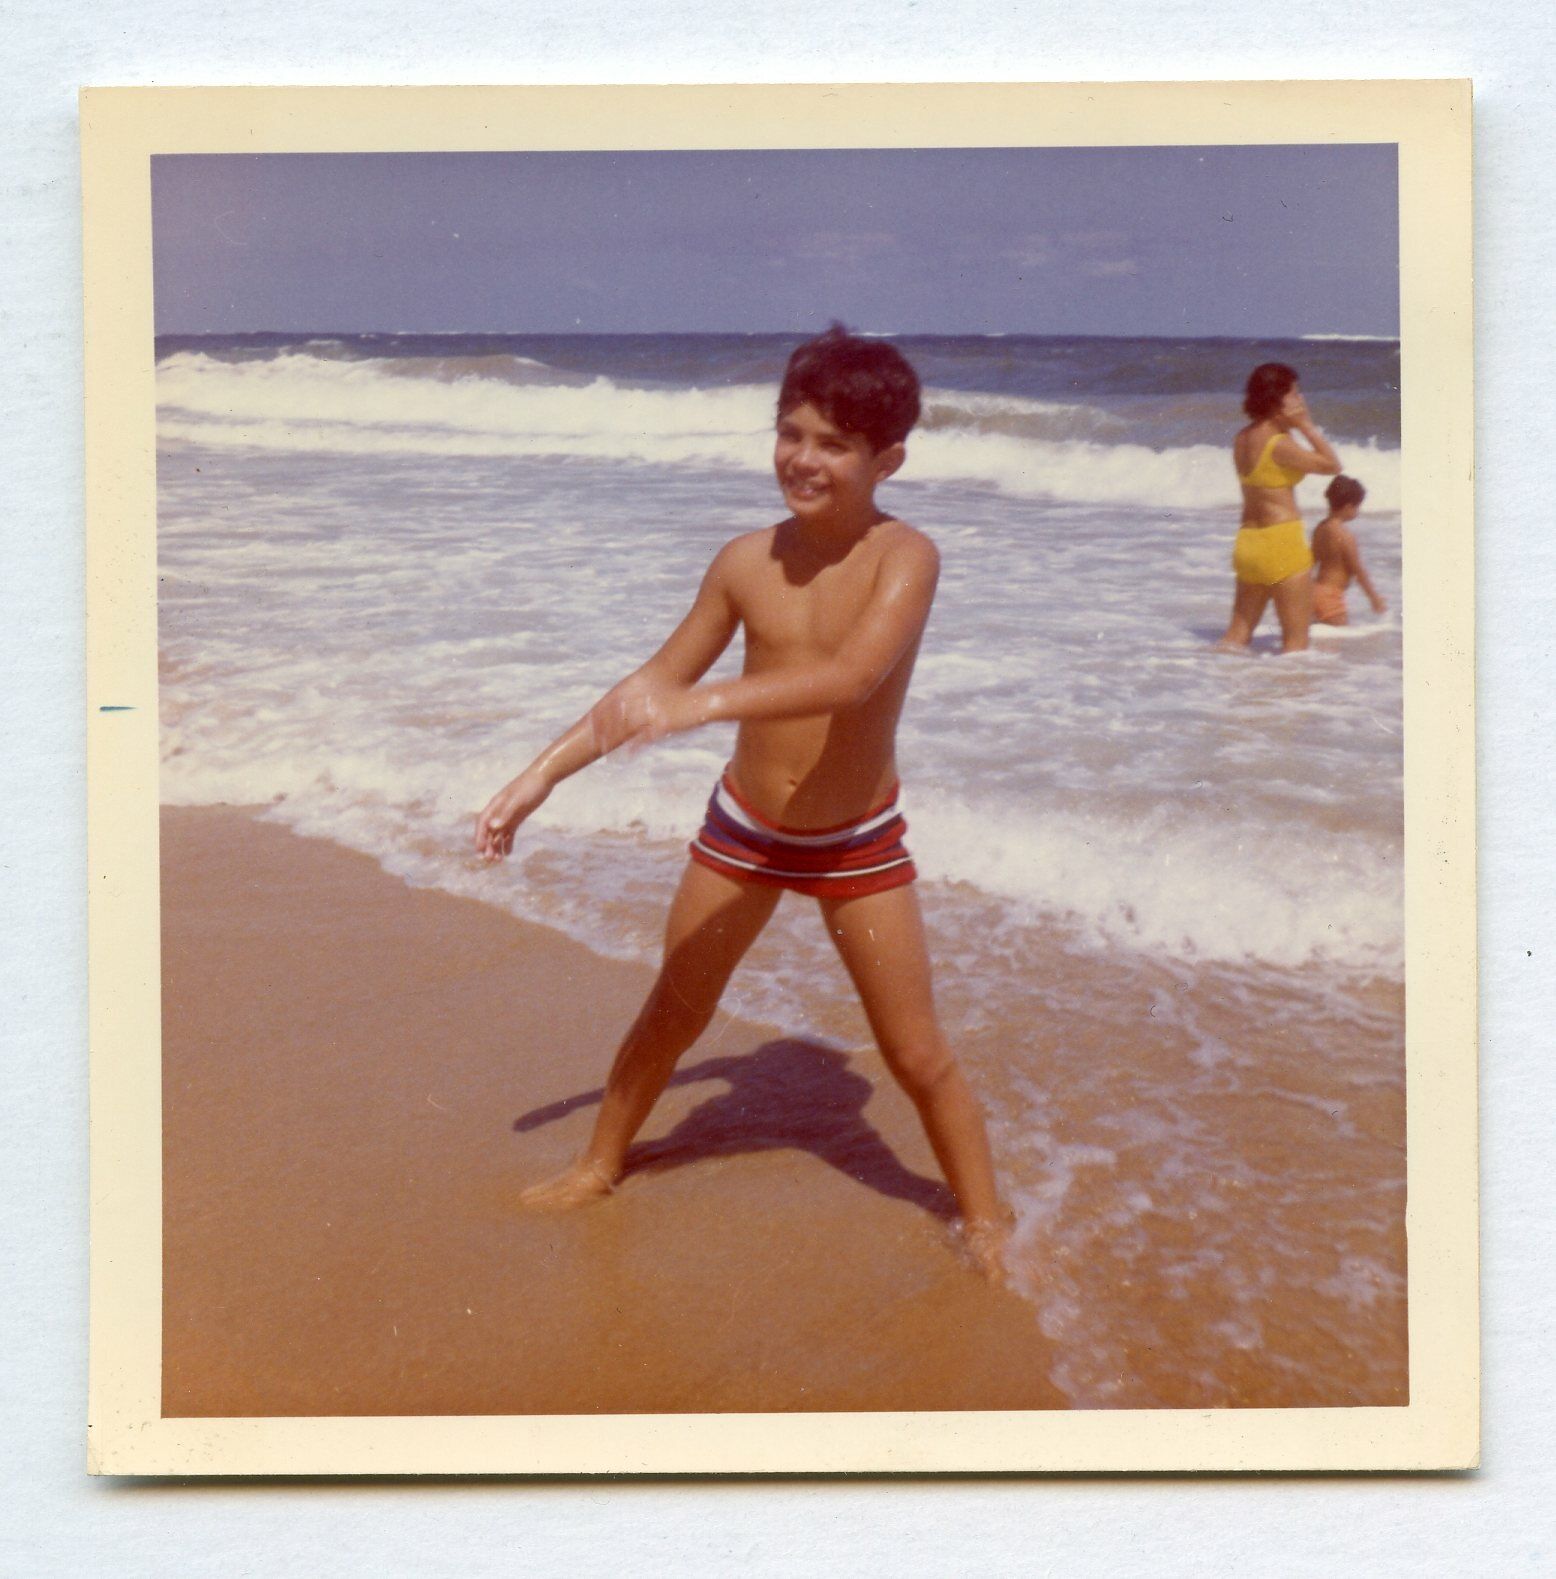 # 1 VINTAGE PHOTO SWIMSUIT BOY ON THE BEACH  COLOR  SNAPSHOT 